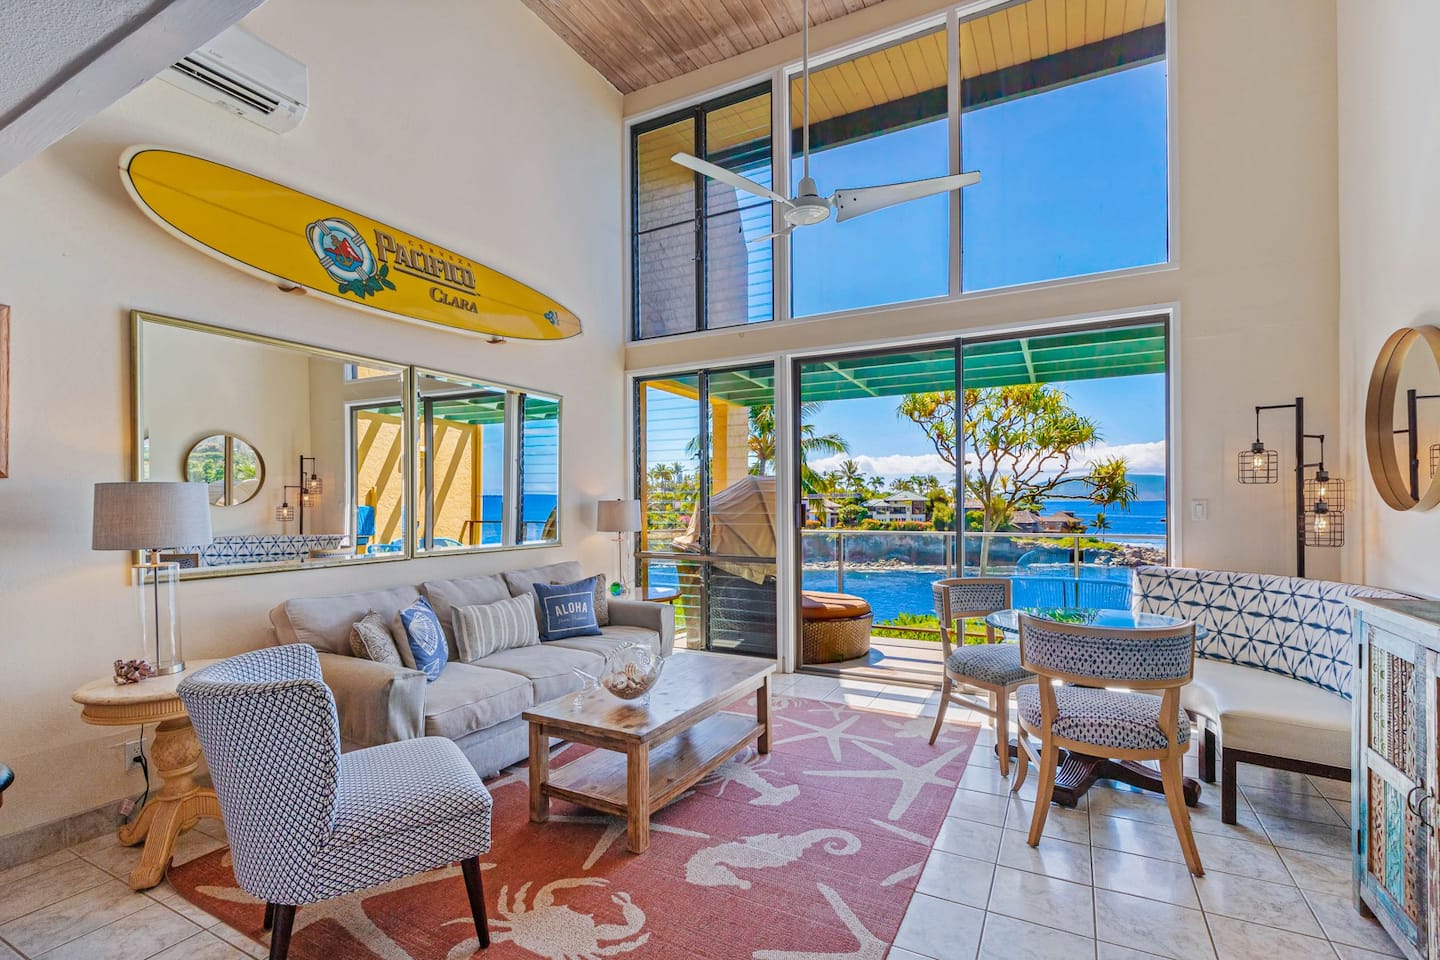 15 Dreamy AirBNB Maui Vacation Rentals [UPDATE 2021]